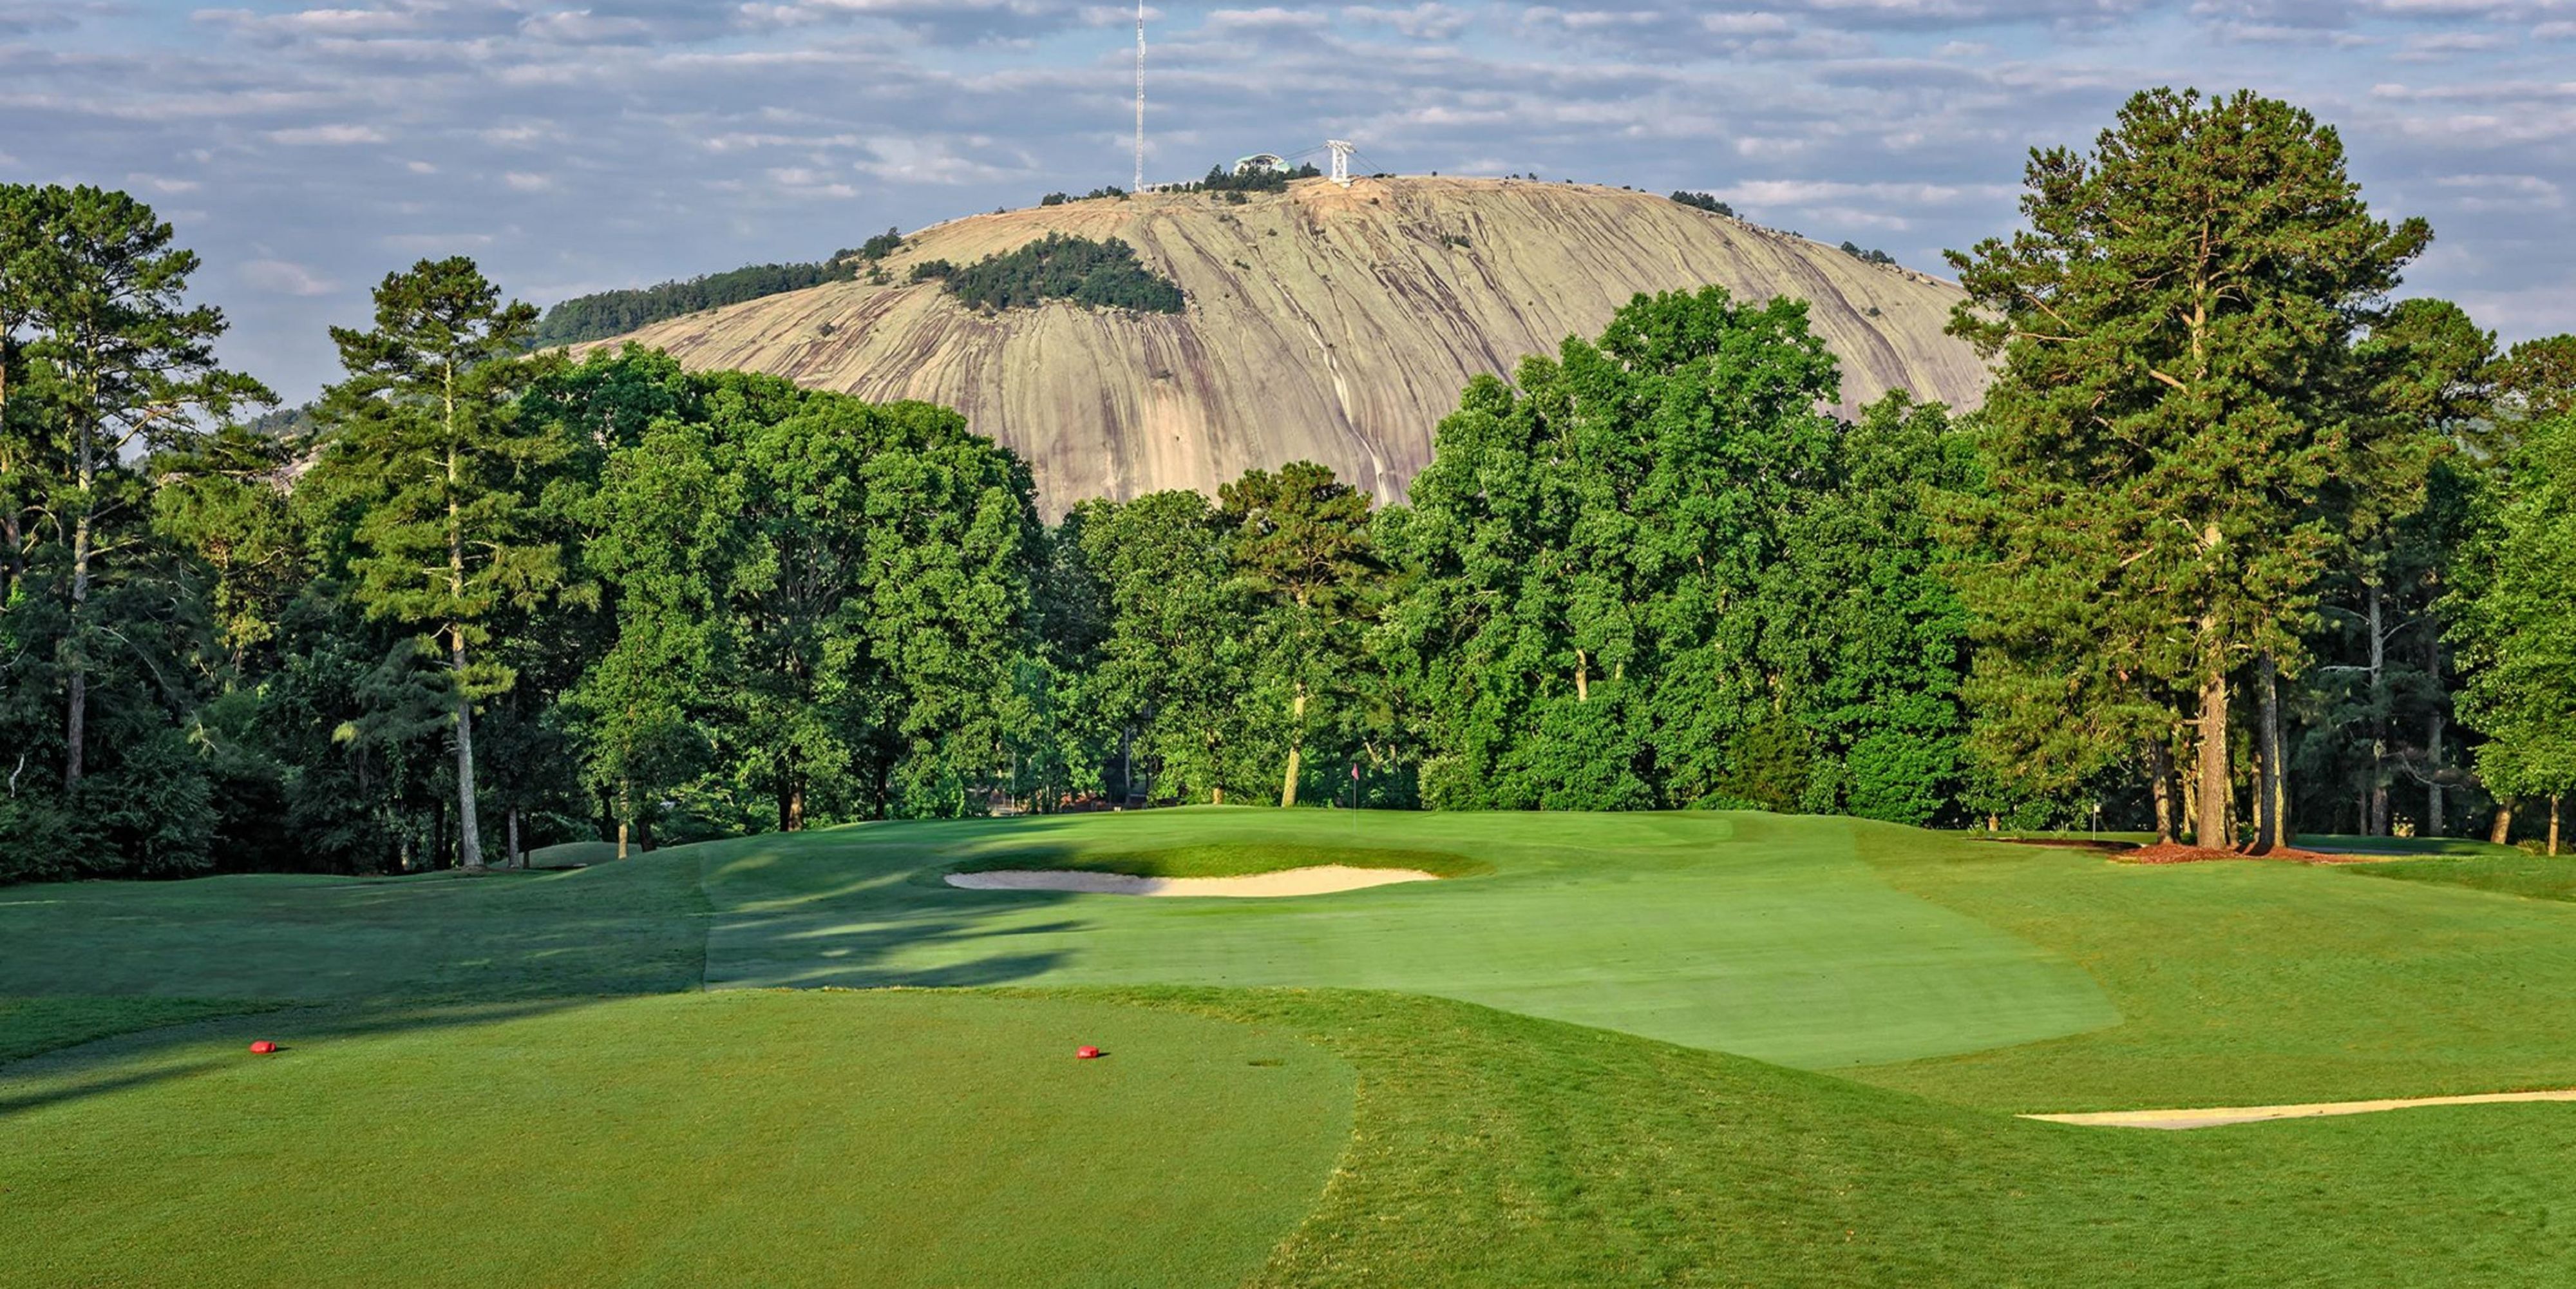 Engulfed by the pristine beauty of Georgia nature, Stone Mountain Golf Club has become one of the premier golf experiences in the Atlanta area. Located just 7 minutes from our hotel, the golf club sits at the foothills of Stone Mountain, and meanders around Stone Mountain Lake.